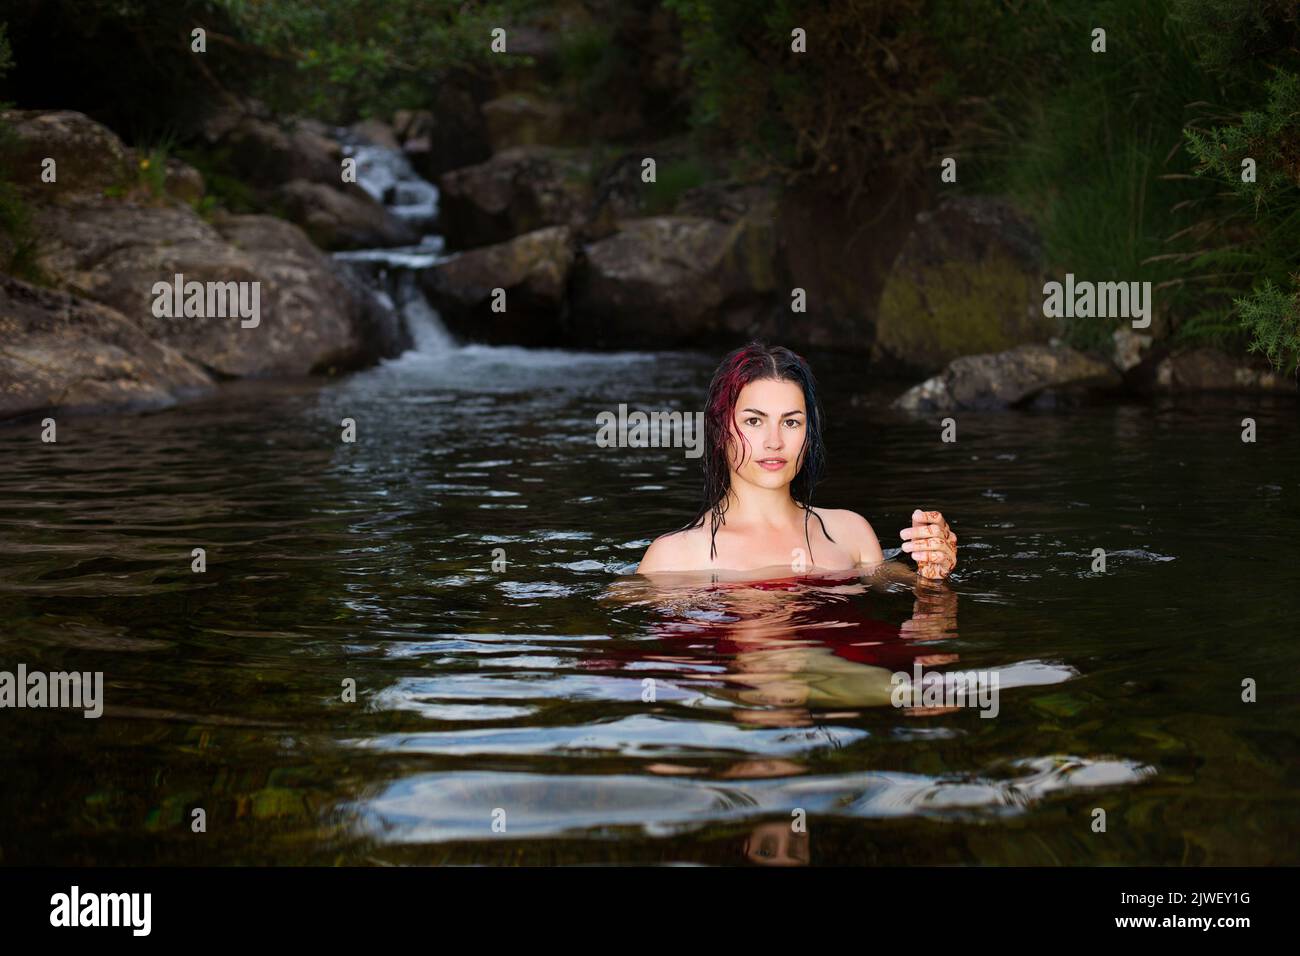 Abeautiful woman cooling off in a mountain stream Stock Photo